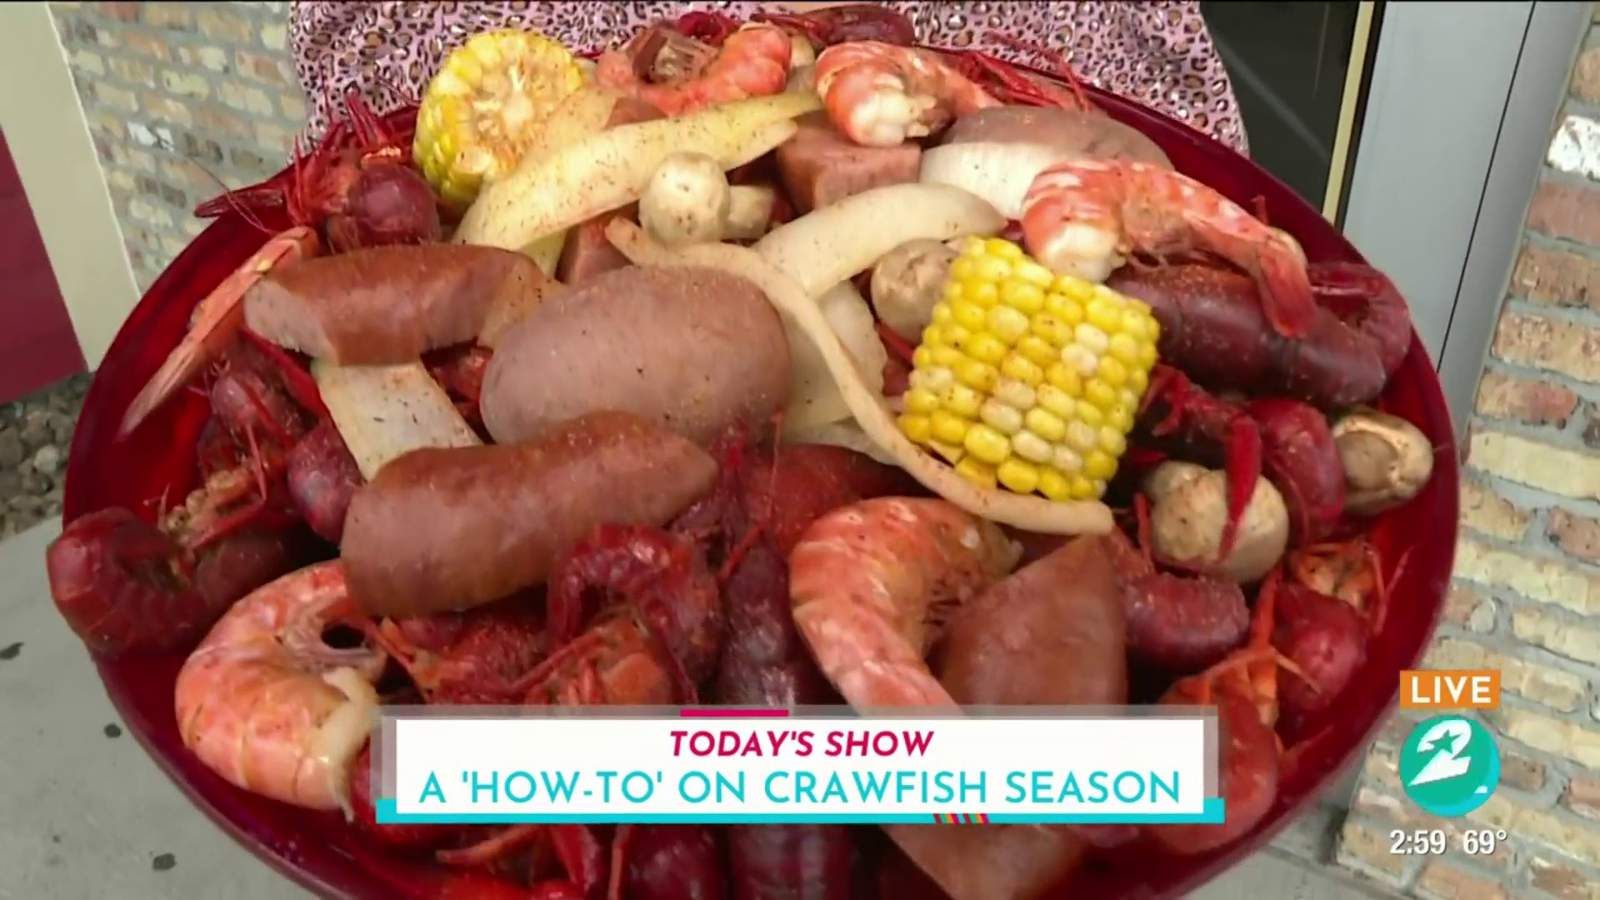 A ‘how-to’ on crawfish season at Willie’s Grill & Icehouse in Cypress